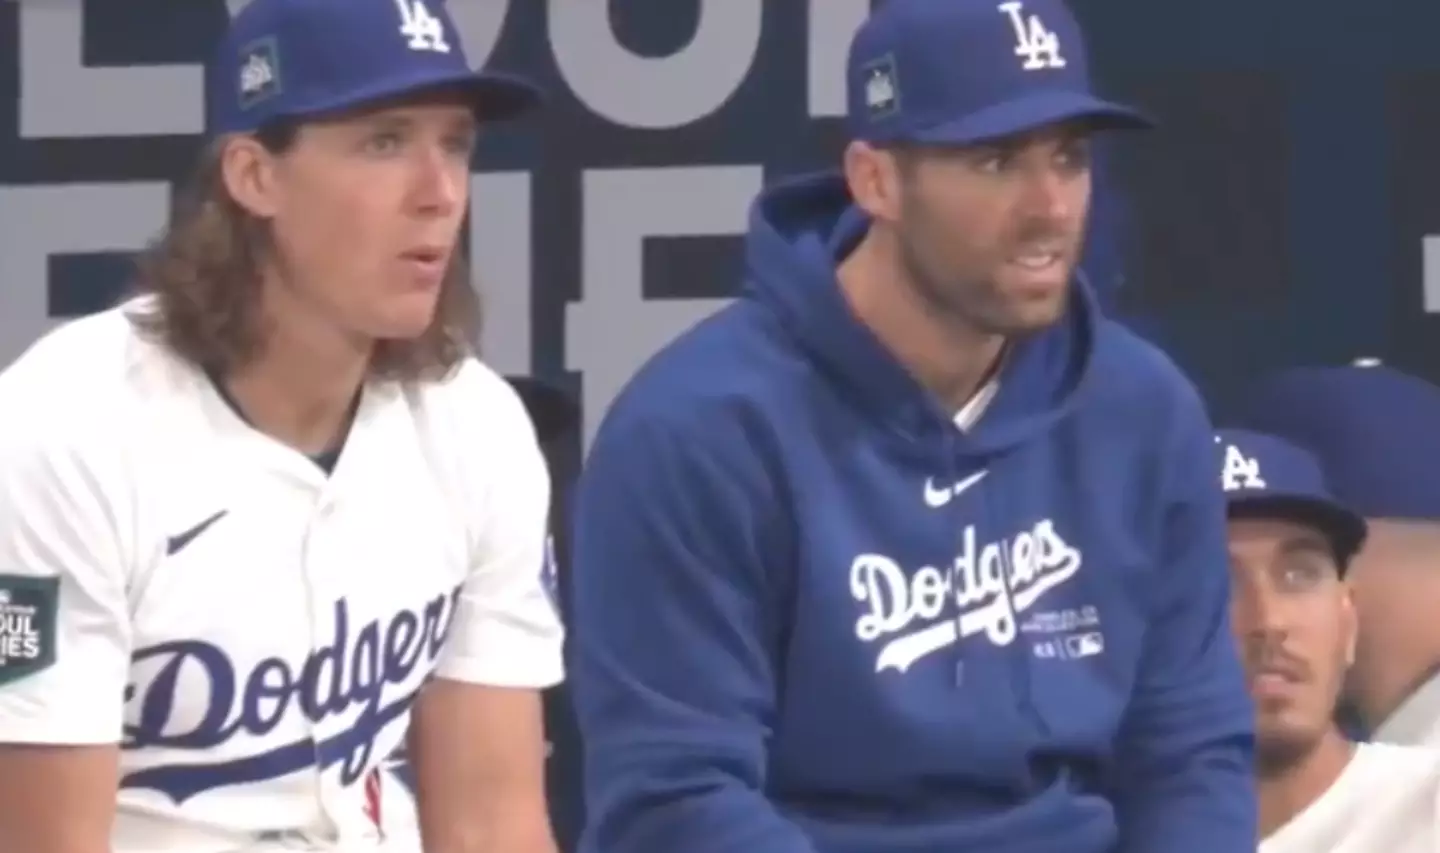 Some Dodgers players struggled to hid their reaction to the Korean star.